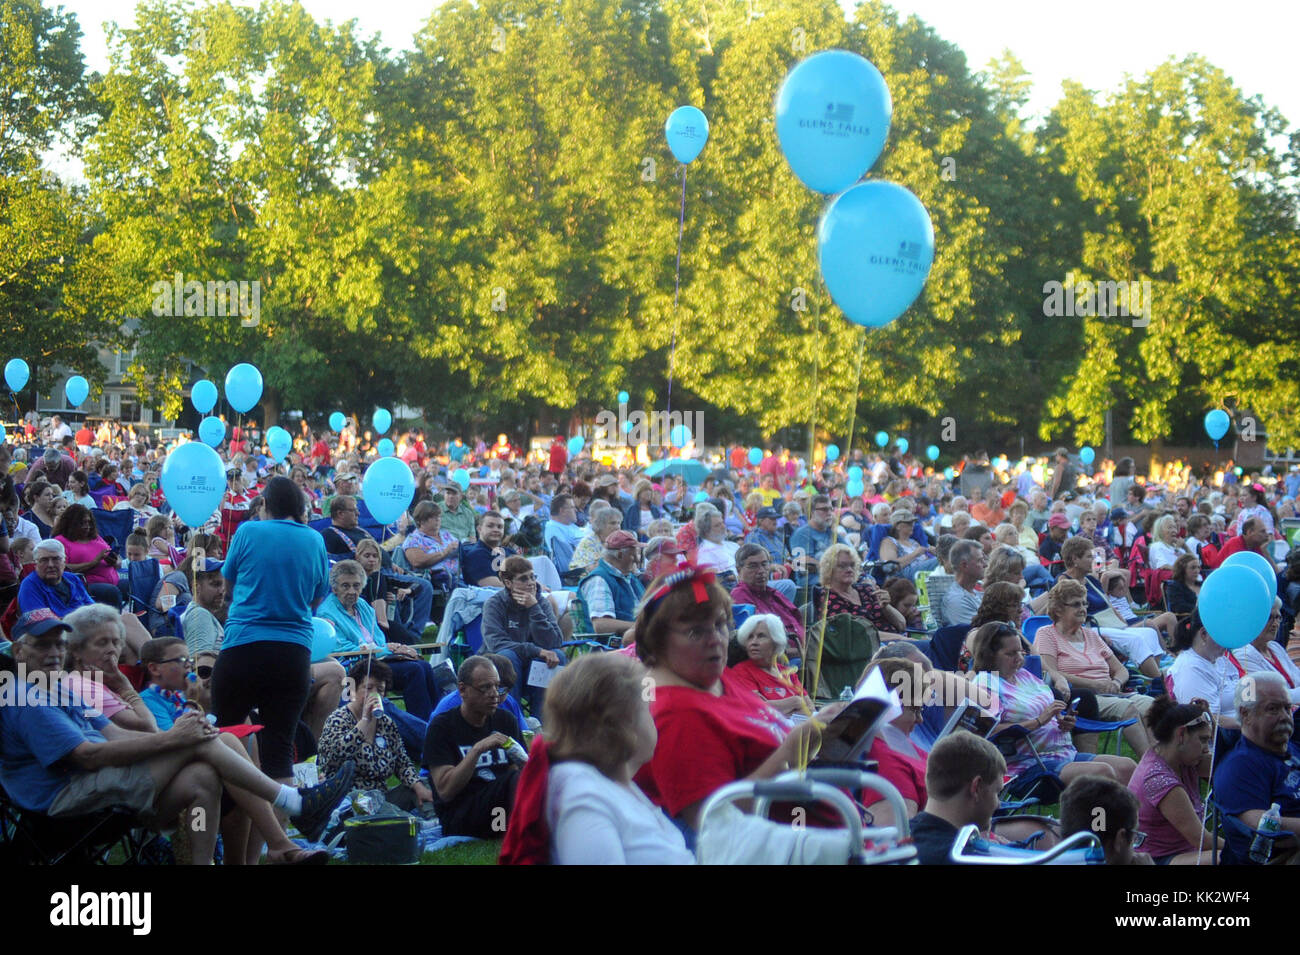 July 3, 2017 - Iowa, U.S. - Balloons provided by the Glens Falls Collaborative dotted the packed crowd at the Glens Falls Symphony Orchestra's 15th annual Summer Pops Concert Monday in Crandall Park. The orchestra, under the direction of Maestro Charles Peltz, performed music from New York state, featuring several works by composers from the state. (Credit Image: © Bill Toscano/Quad-City Times via ZUMA Wire) Stock Photo